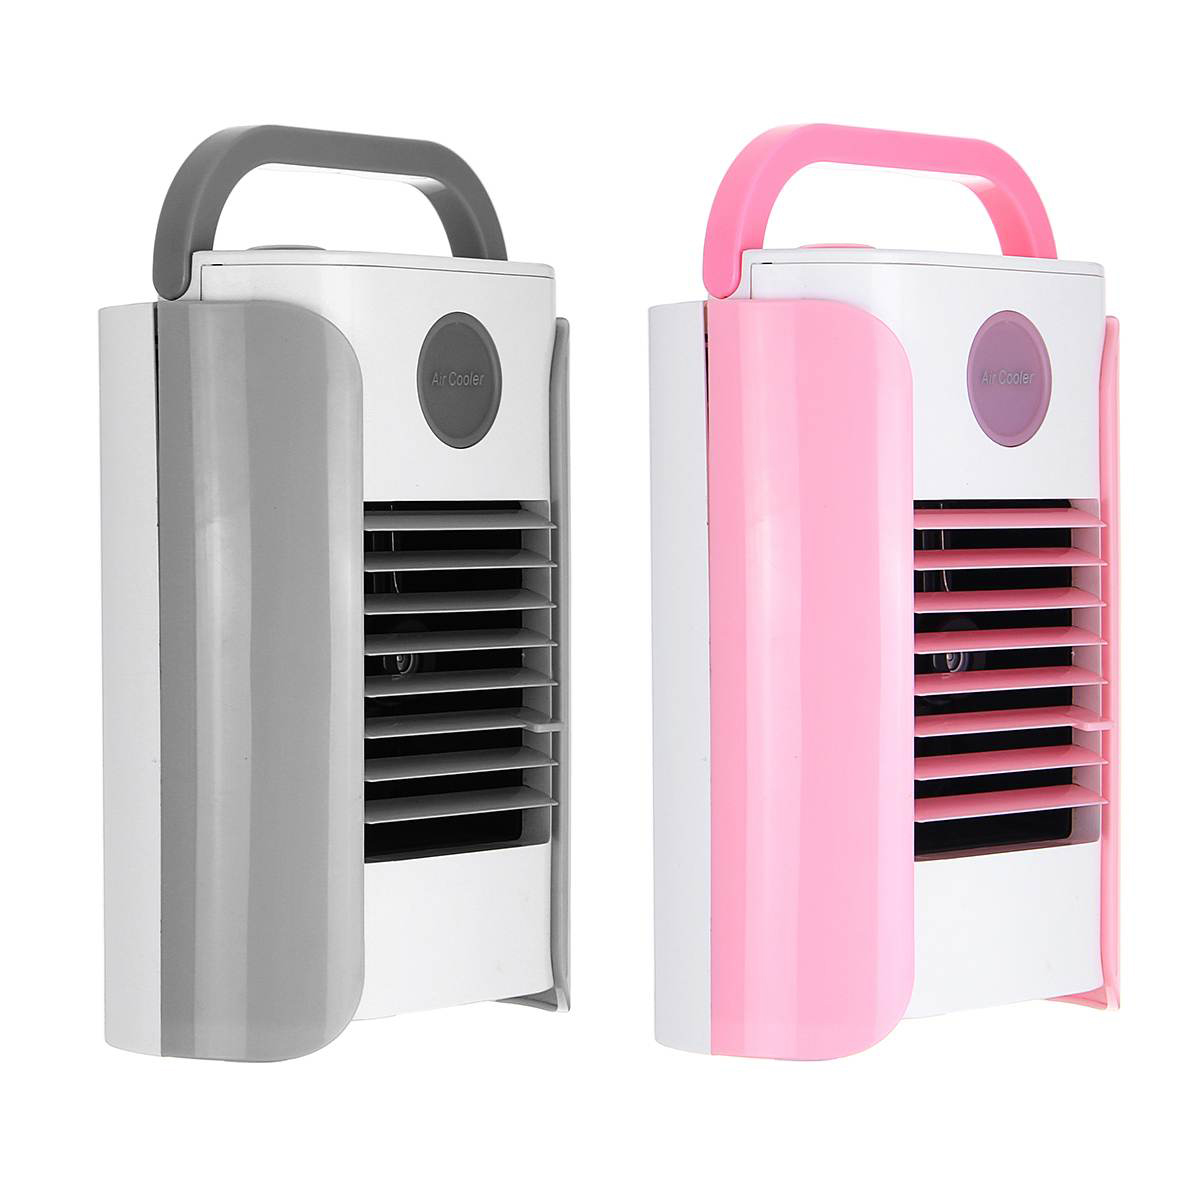 

3 Gears Mini Air Cooling Fan USB Portable Air Conditioner Desk Table Fan Bluetooth/Broadcast